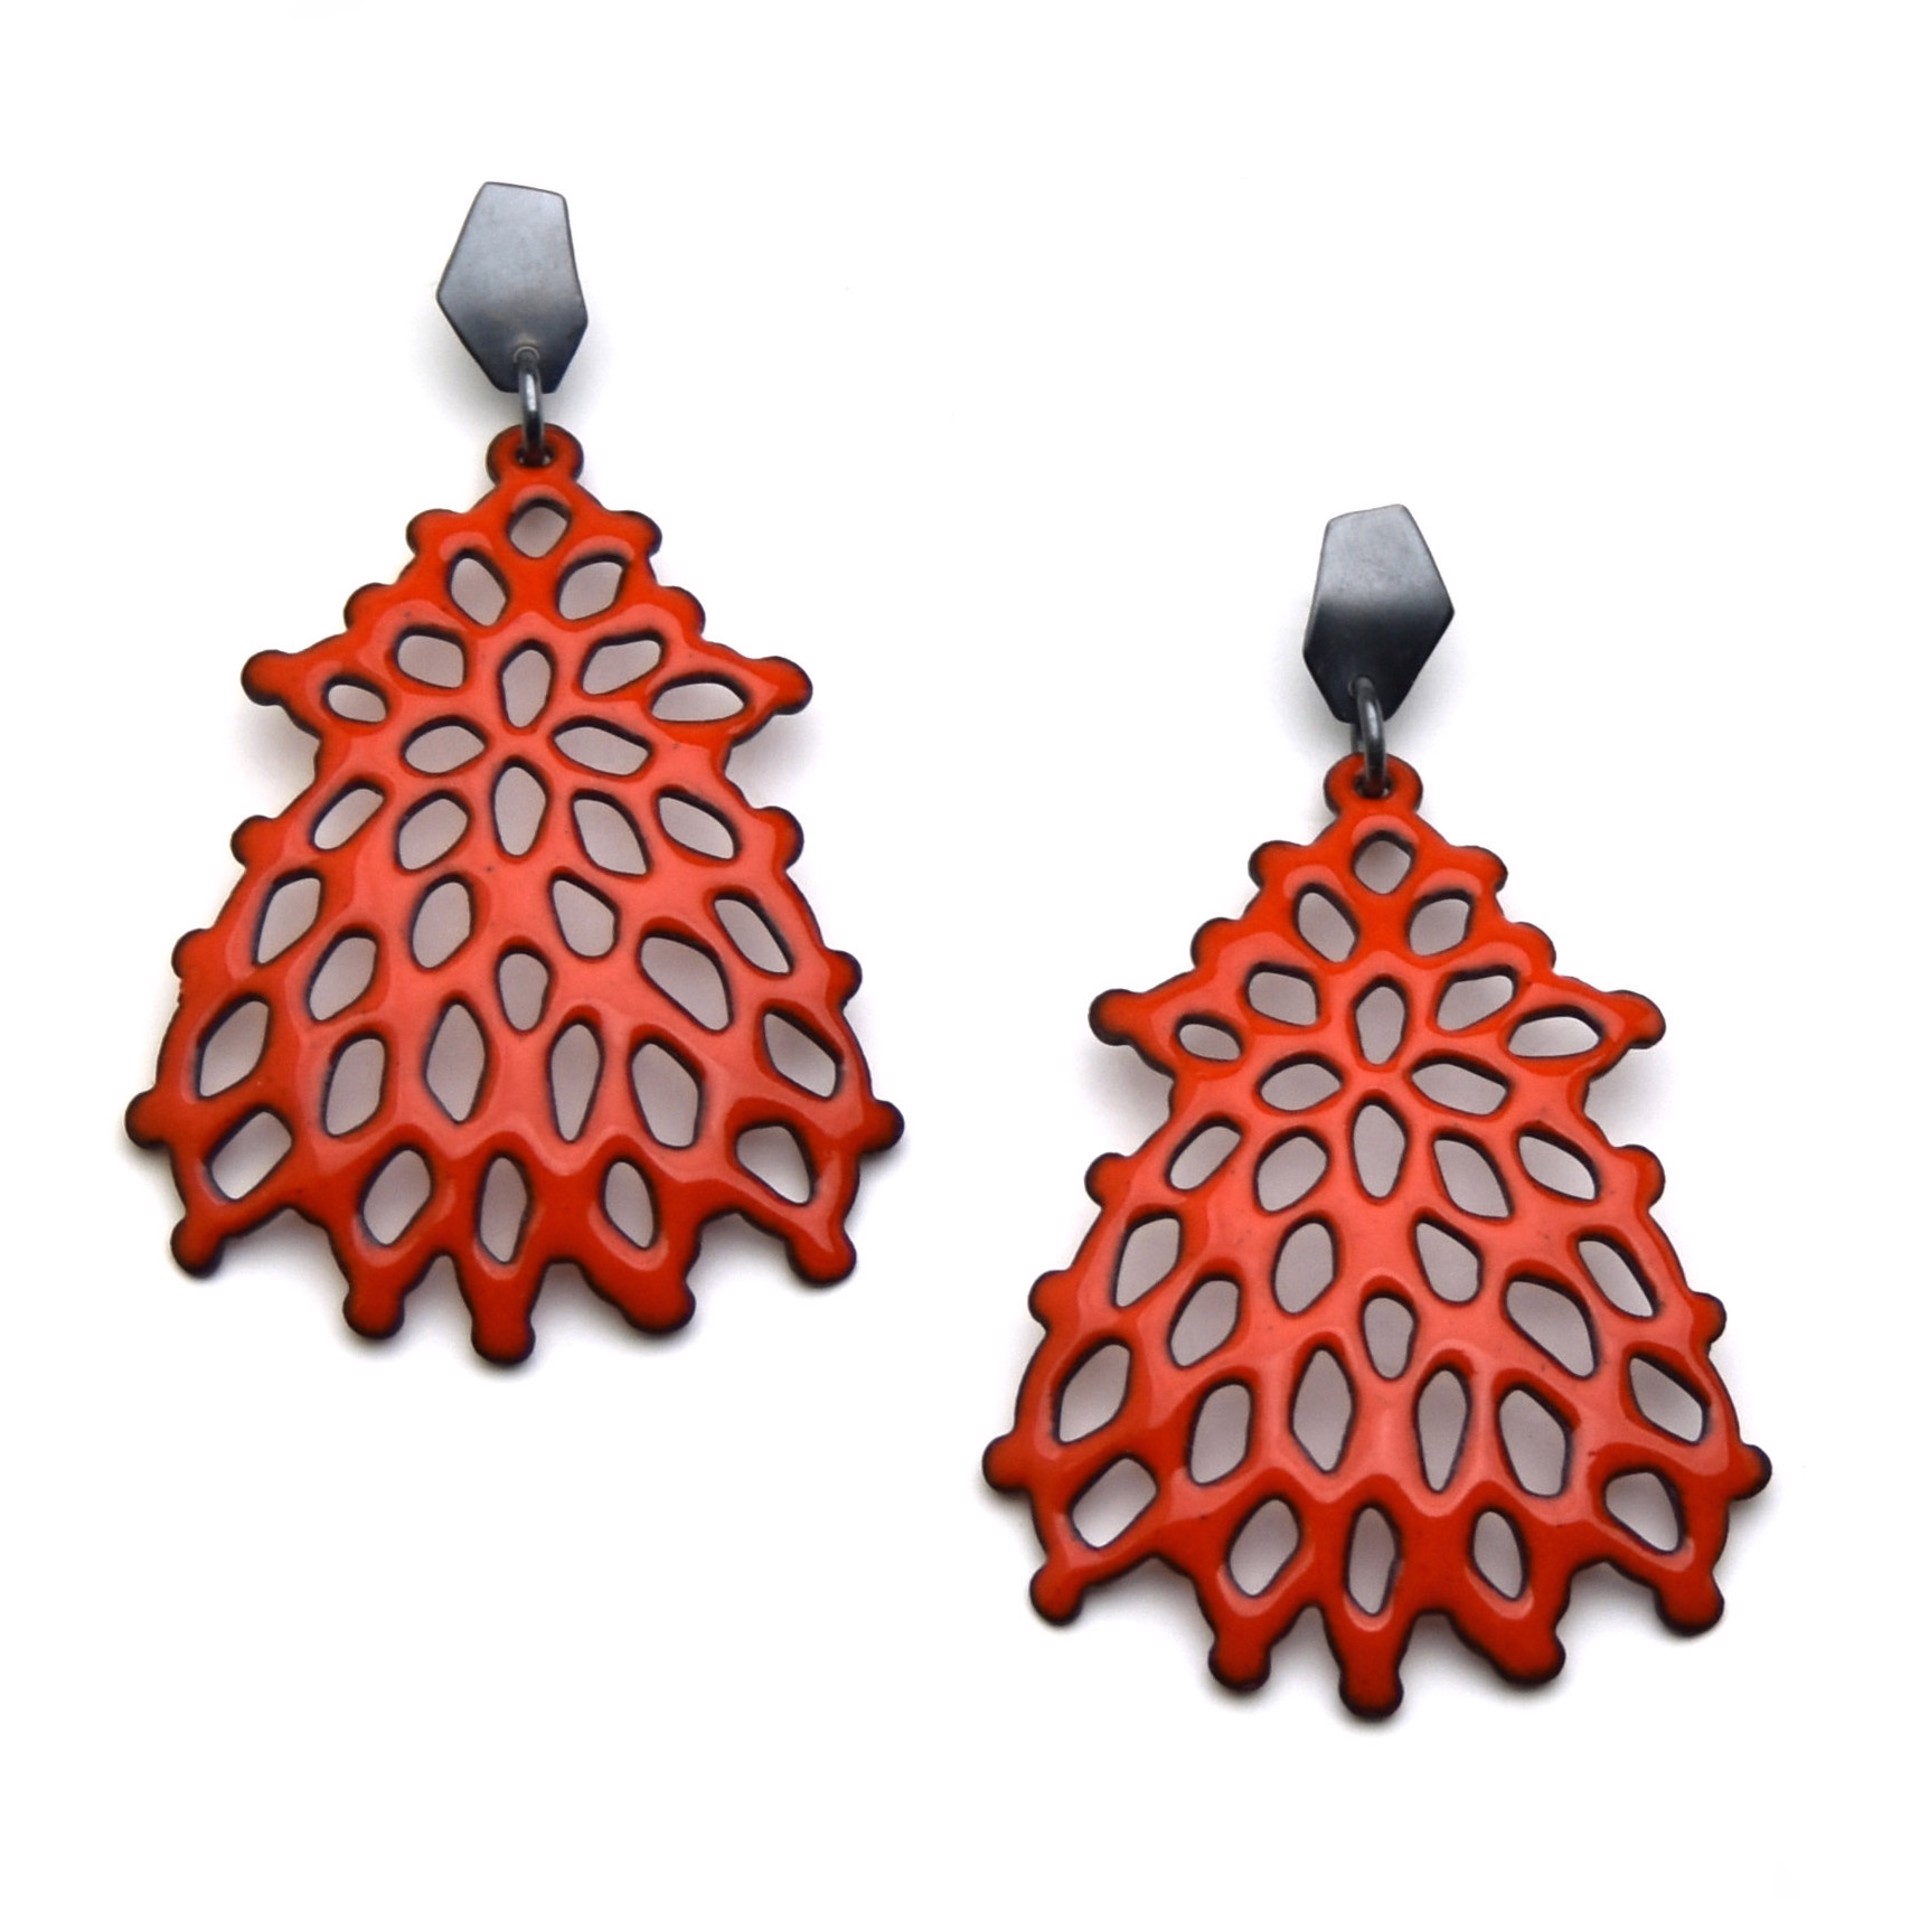 Large Structure Earrings by Joanna Nealey